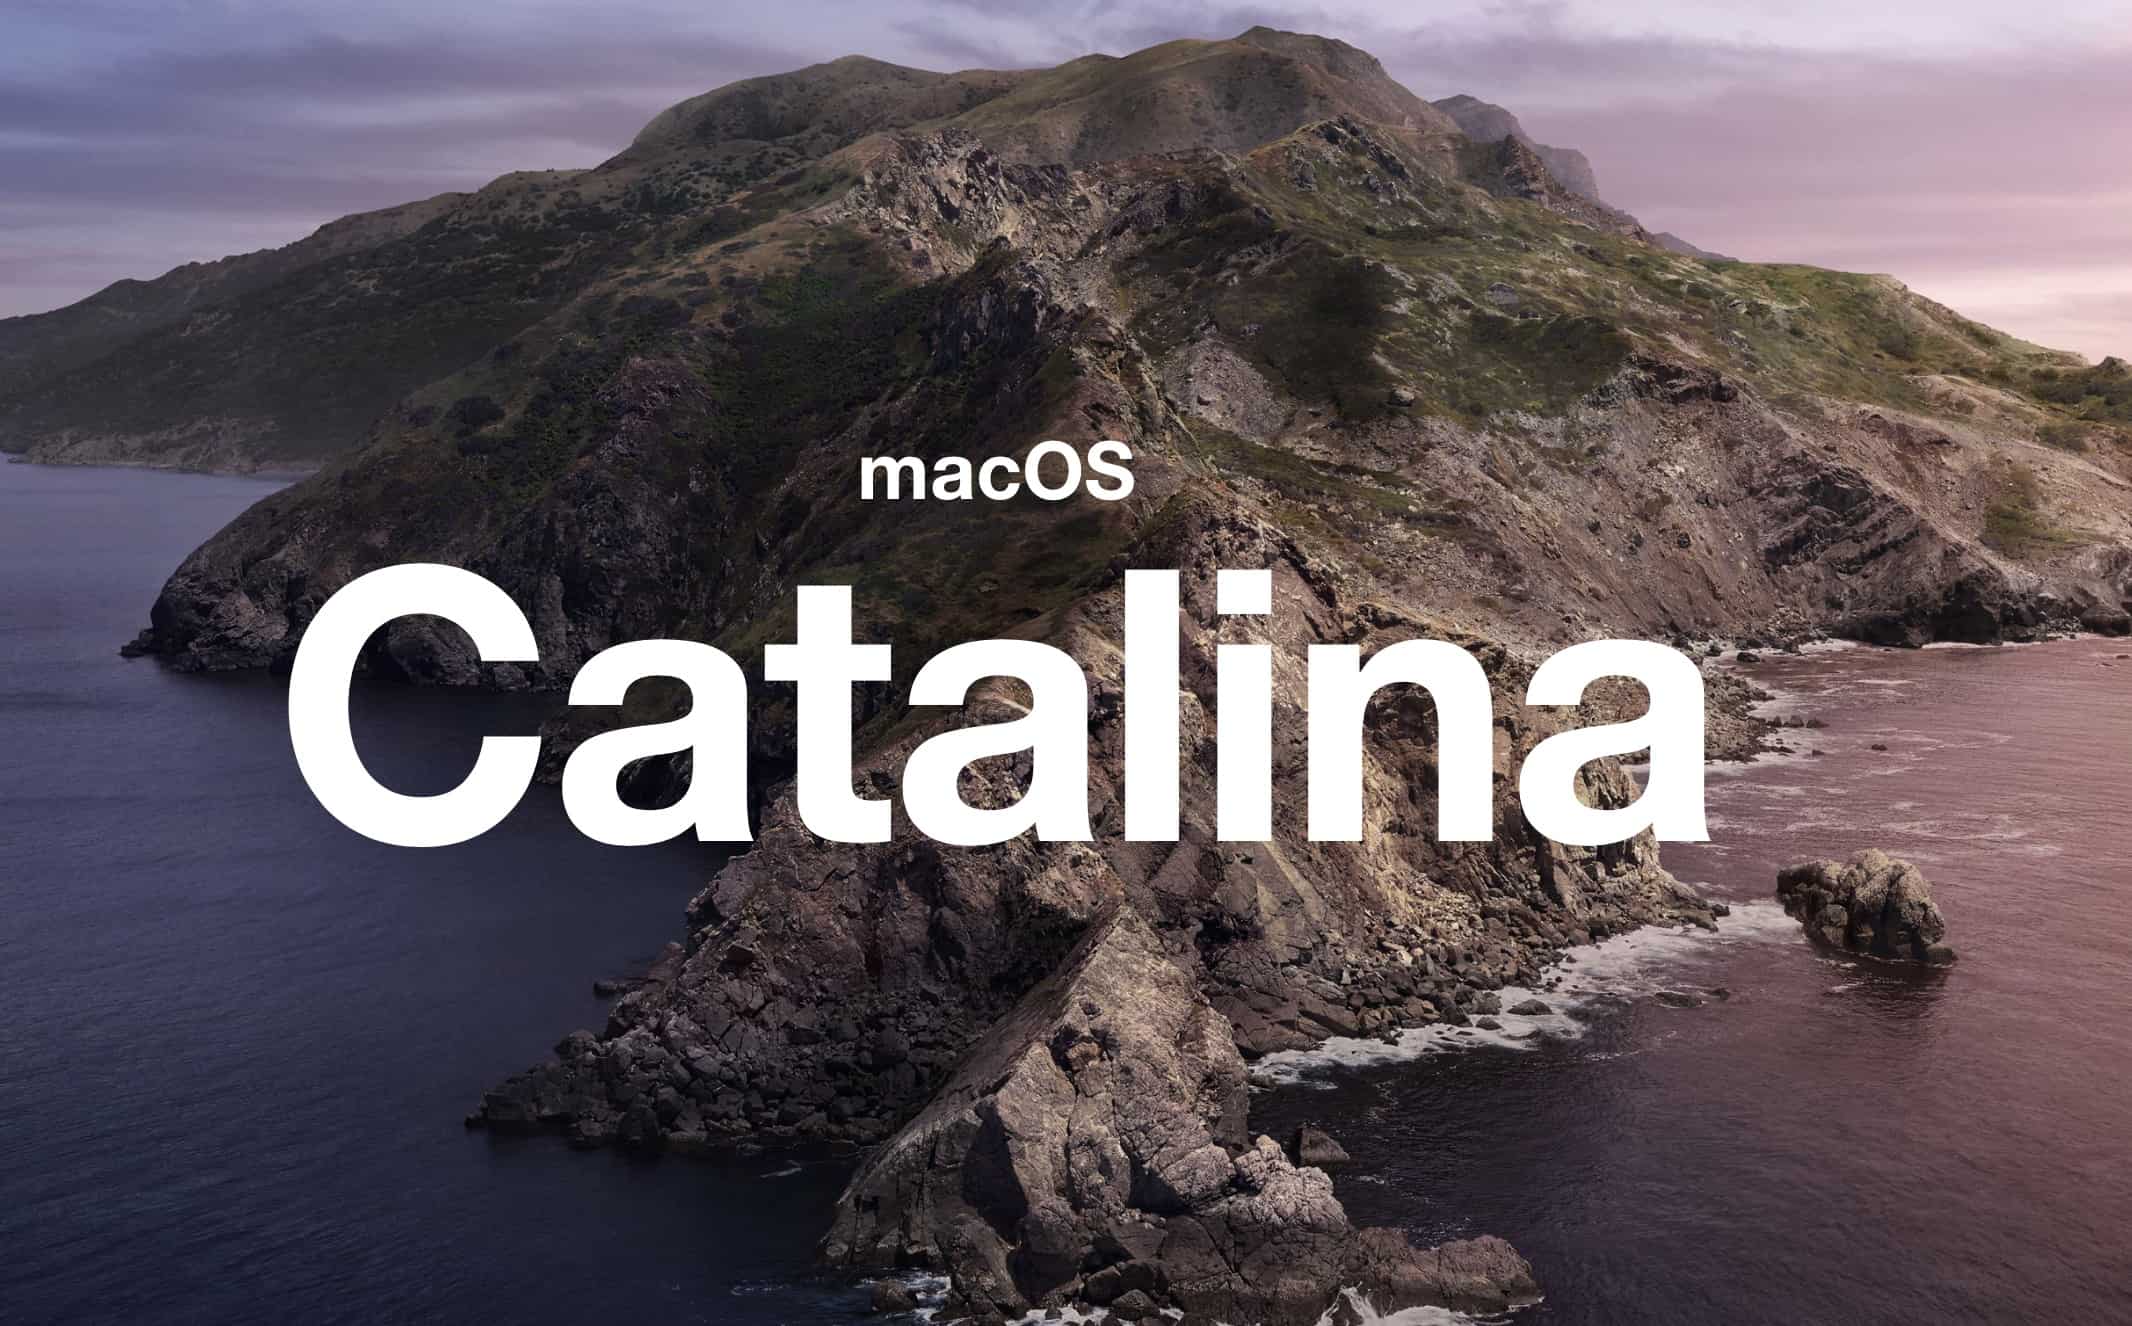 instal the last version for apple Catalina